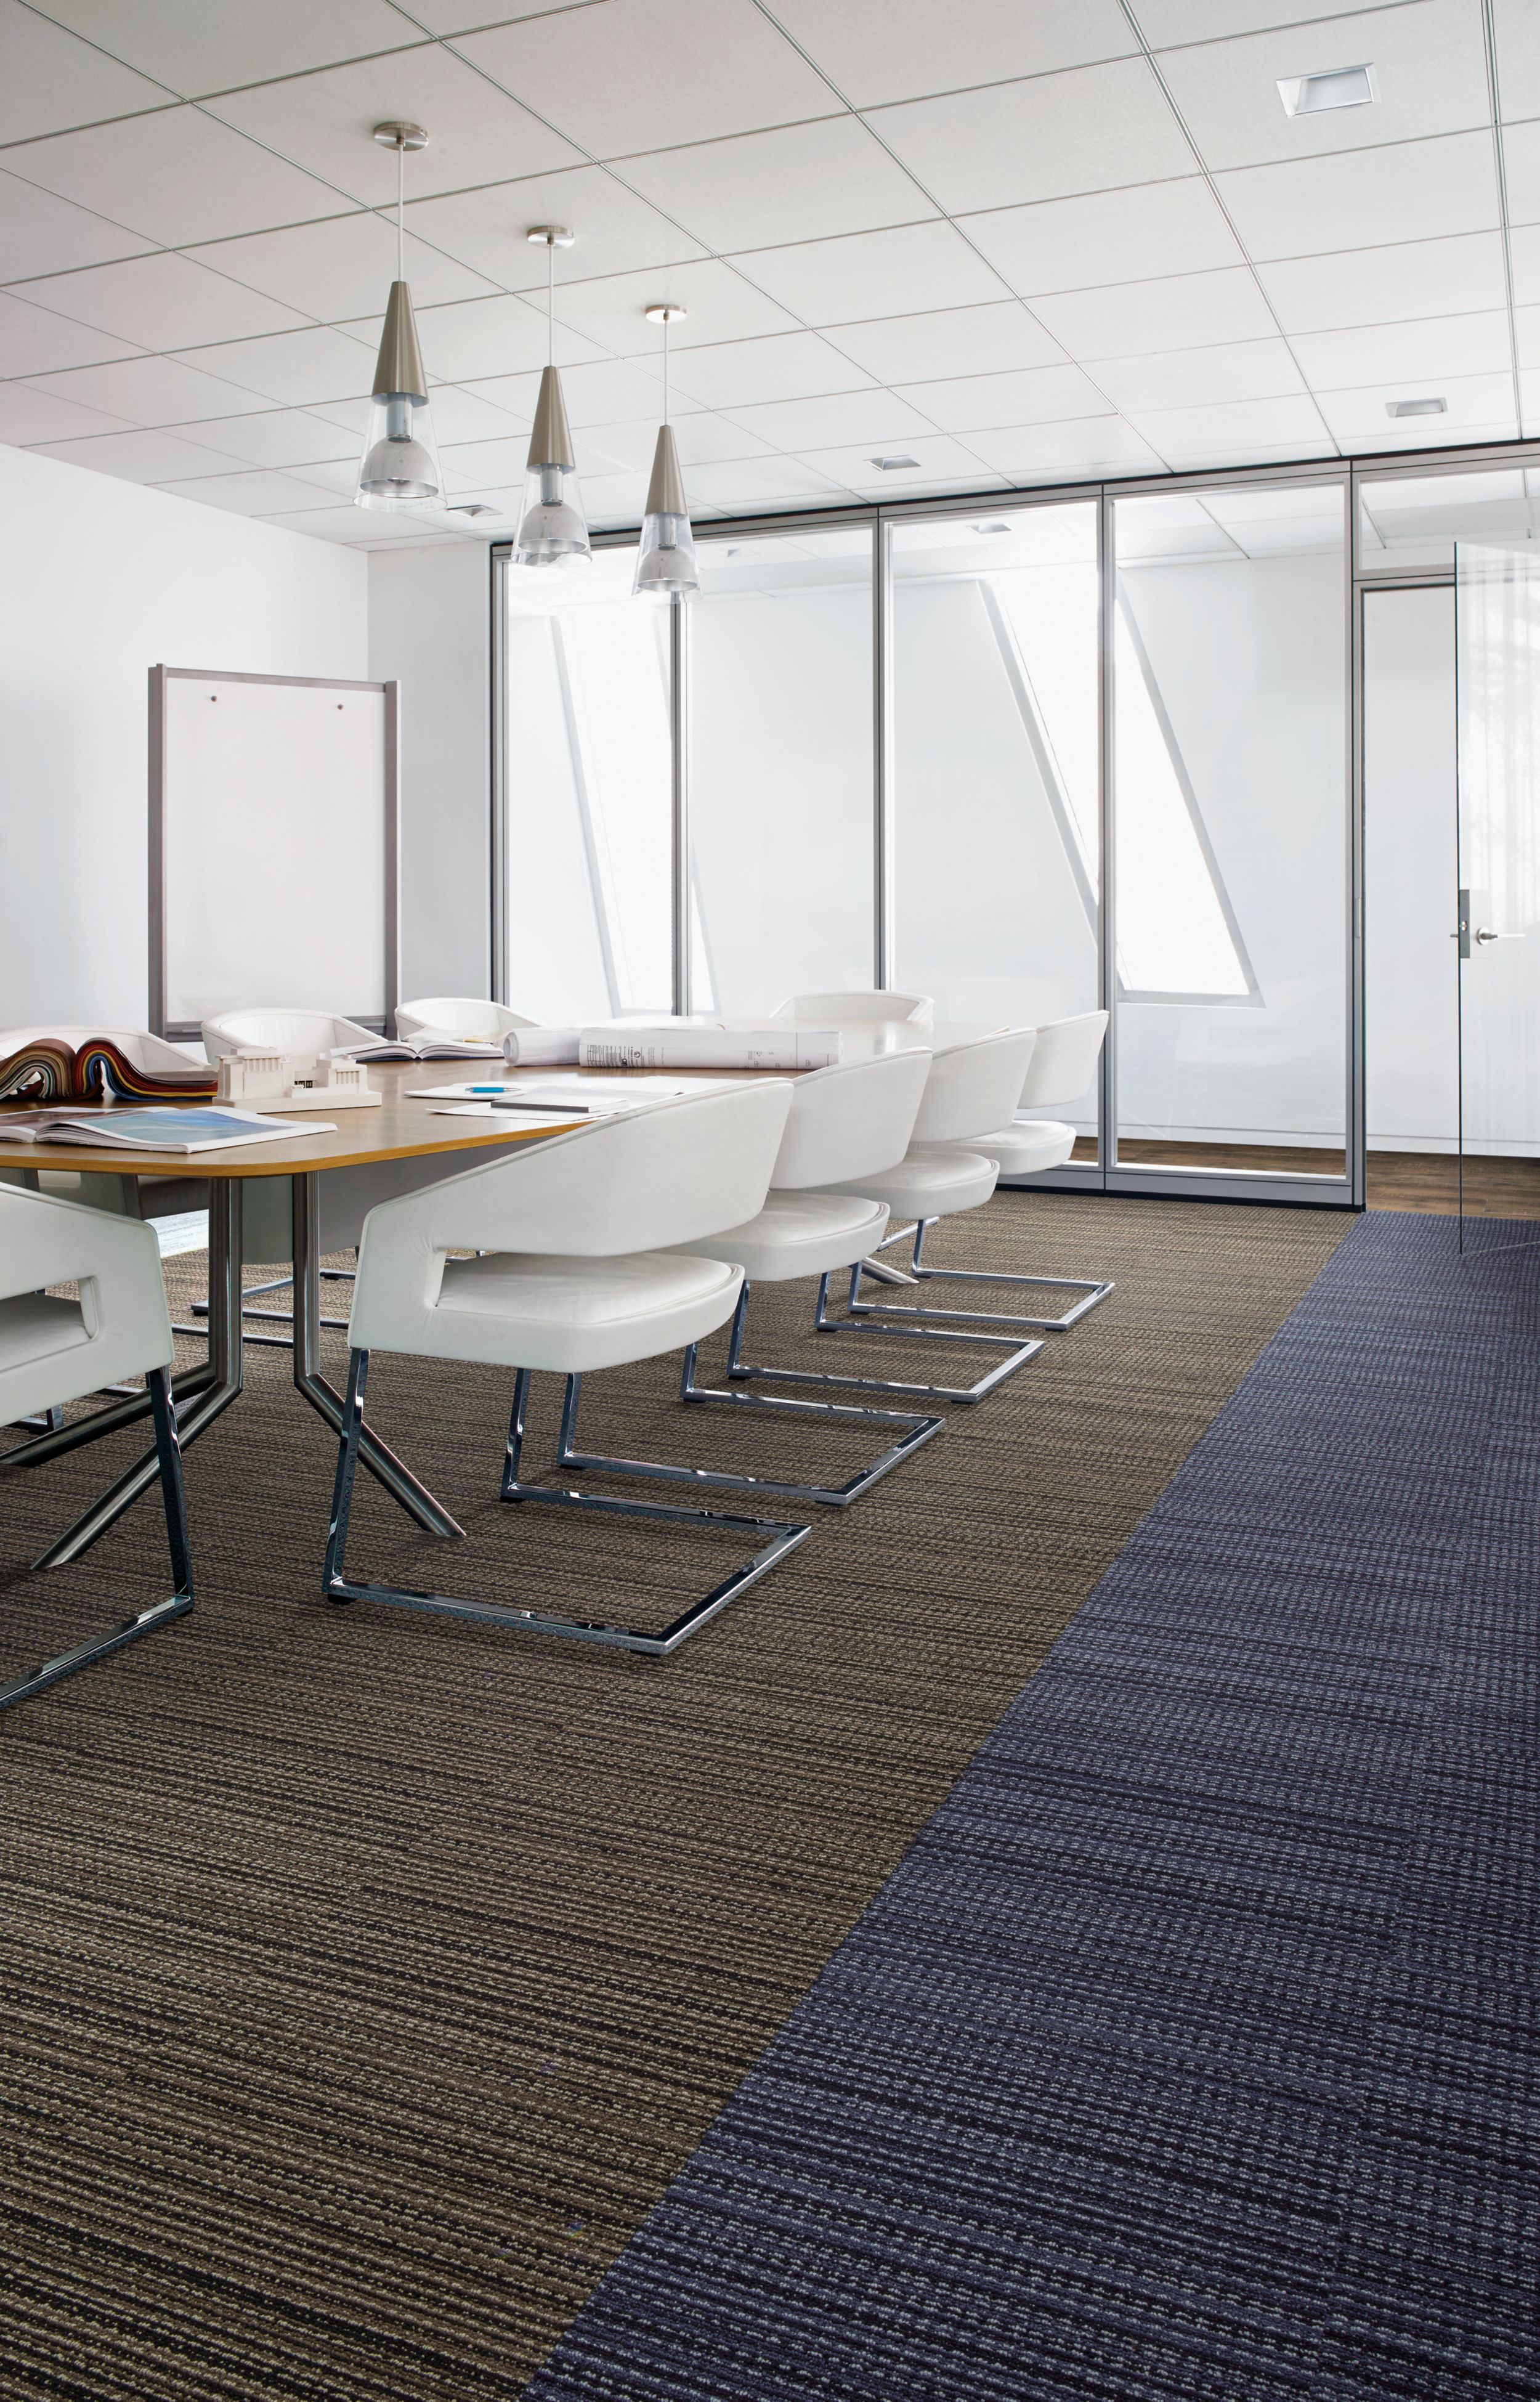 Interface La Paz carpet tile and Textured Woodgrains LVT in glass-enclosed meeting area with white chairs imagen número 2